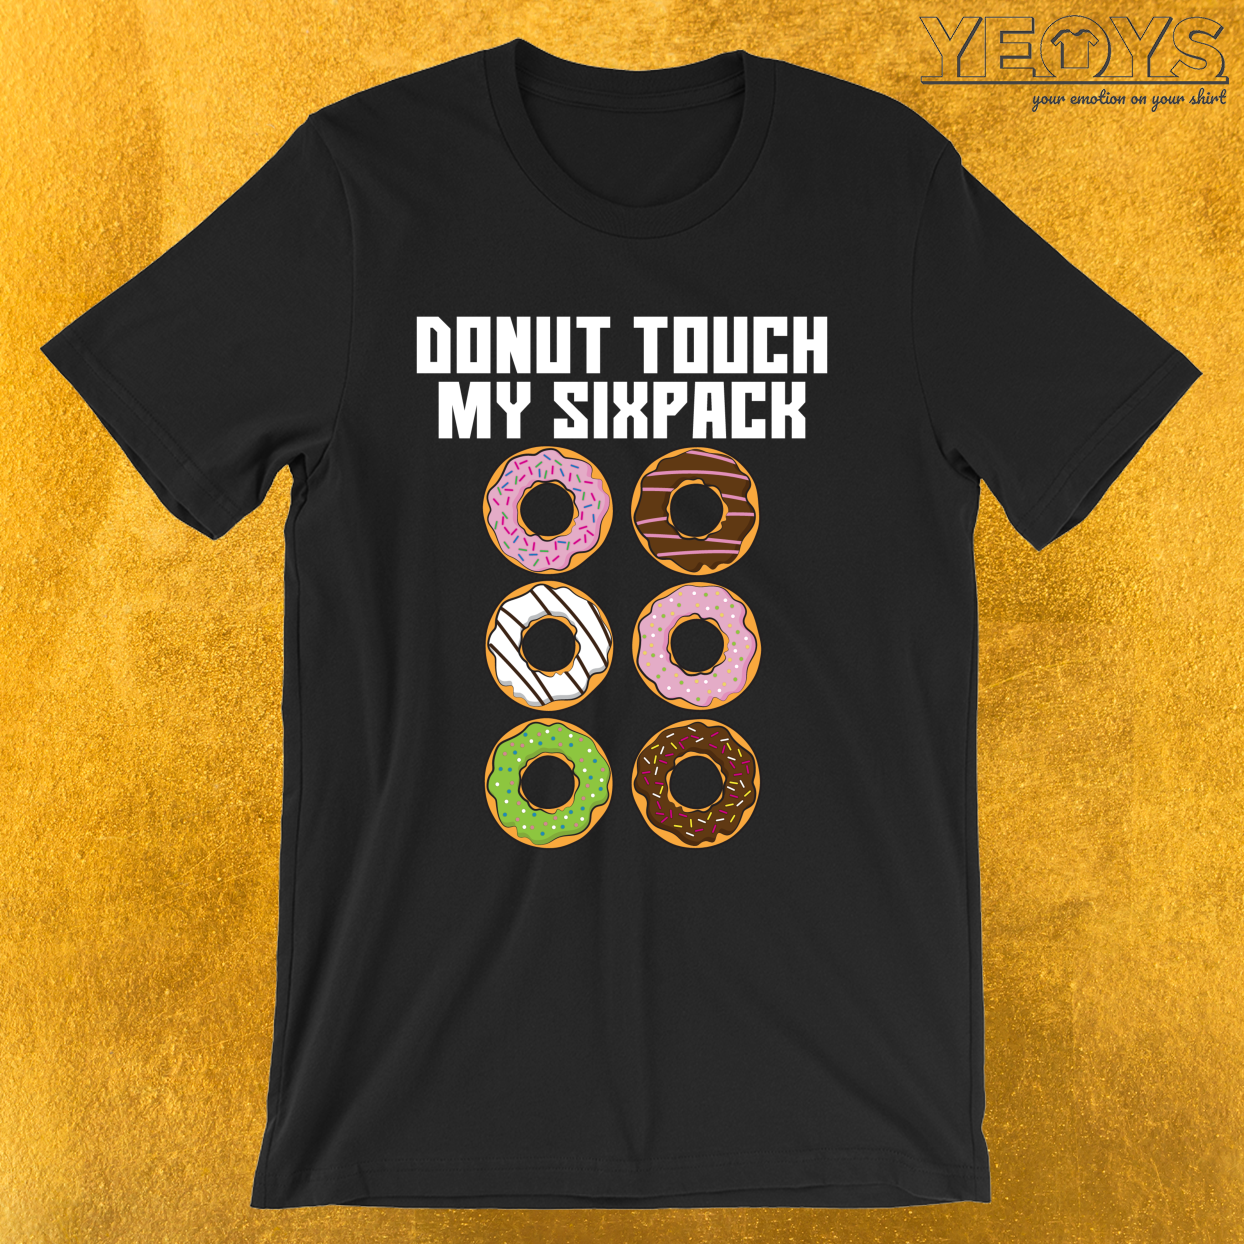 Donut Touch My Sixpack – Funny Donut Tee